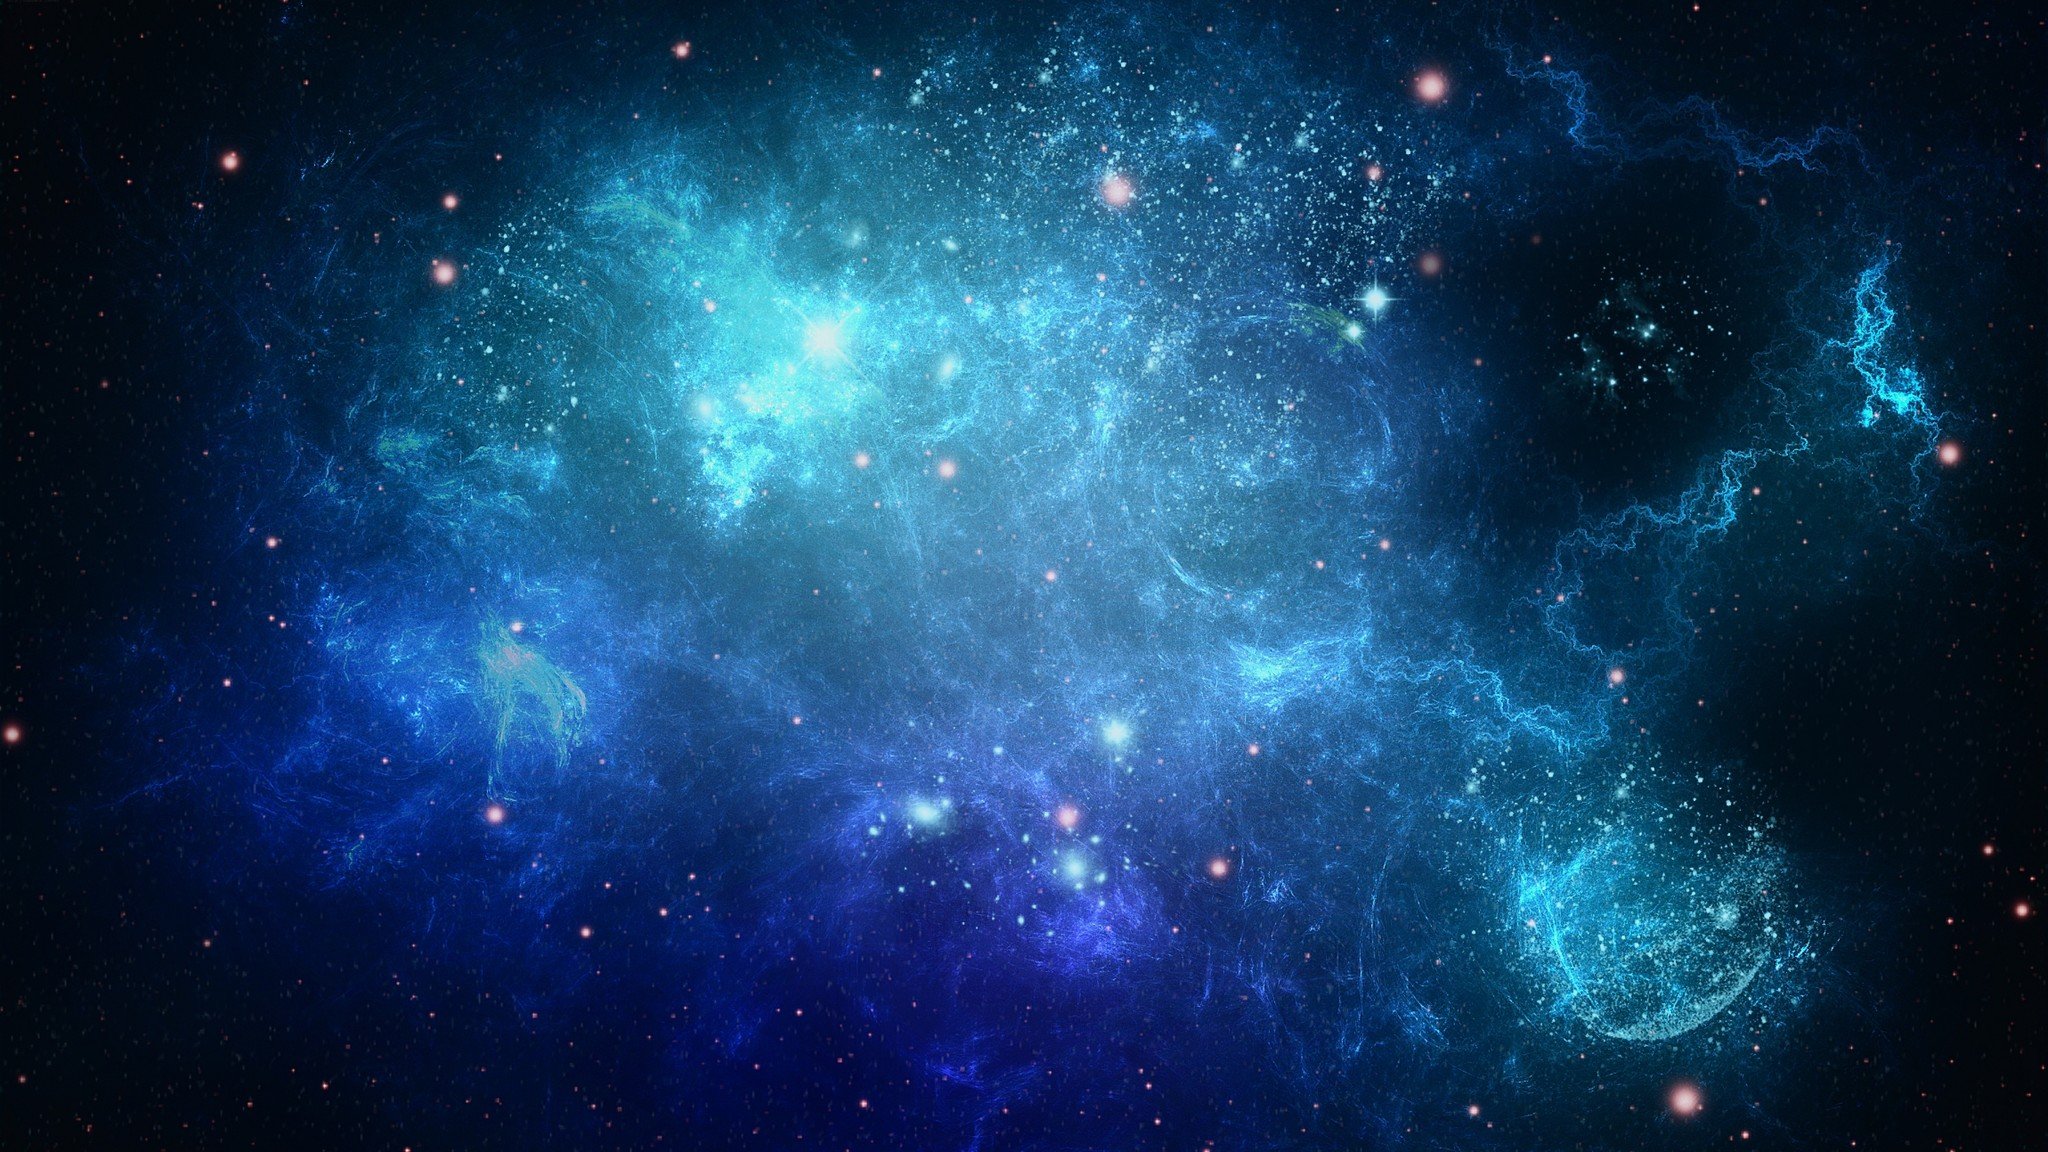 Get Lost In Space With An Out Of This World Wallpaper Android Central